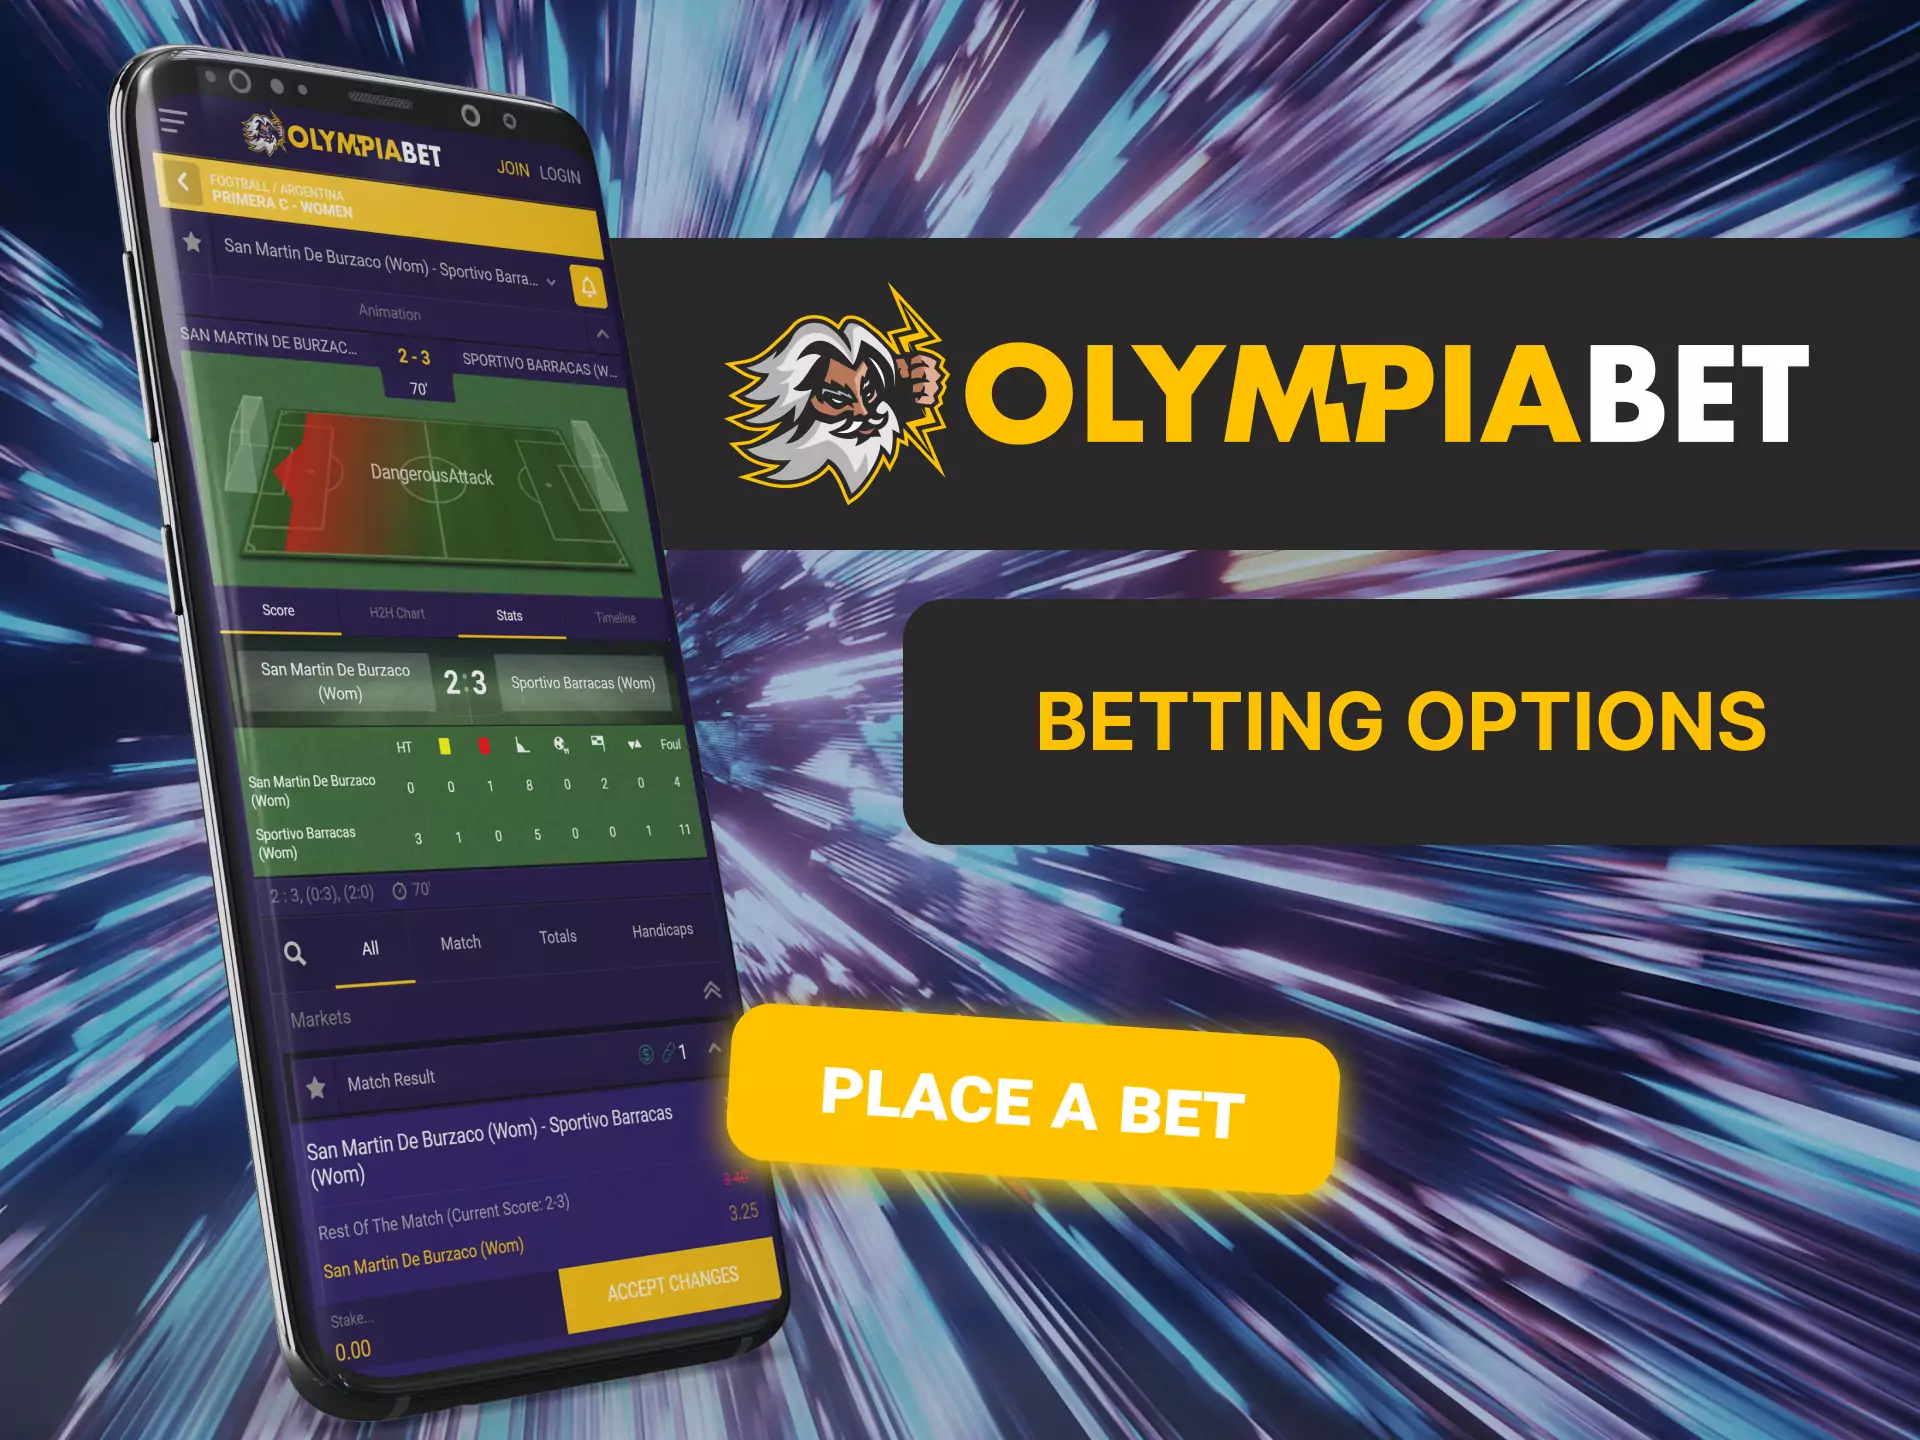 In the OlympiaBet app, try different options for betting on sports events.